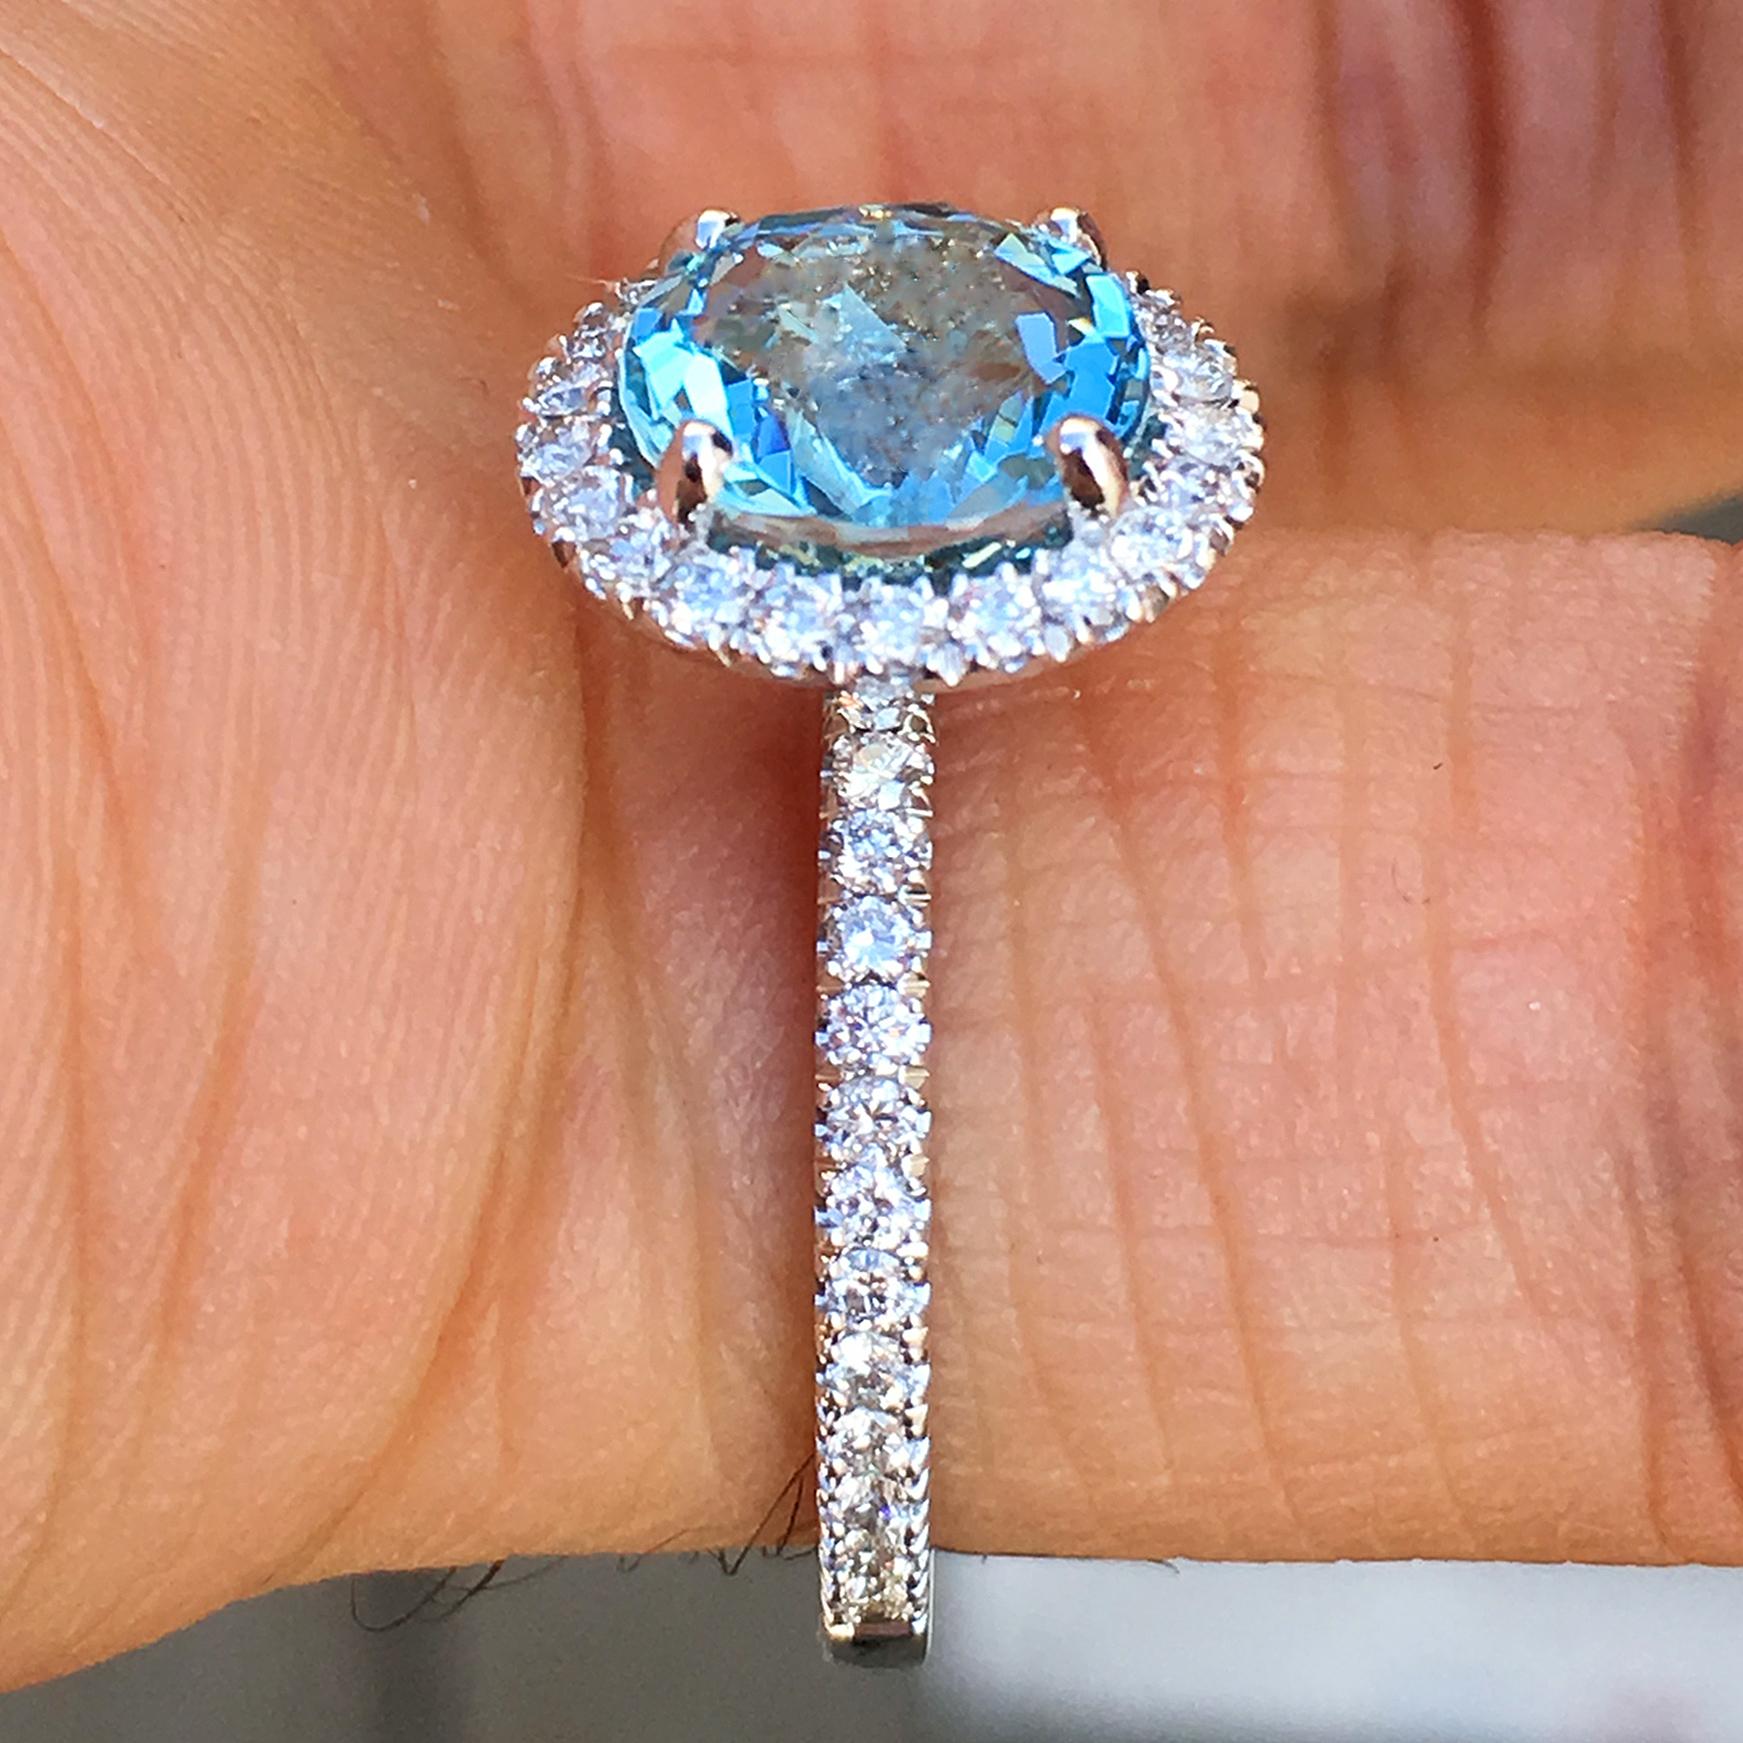 Ring will be made to order to your finger size and take approximately 3-6 weeks, if you need it by a sooner date let us know and we will let you know if we can accommodate you.


1. Carat Weight: 1.5+

2. Color: Aqua

3. Tone:  Medium - Nice, 7.0